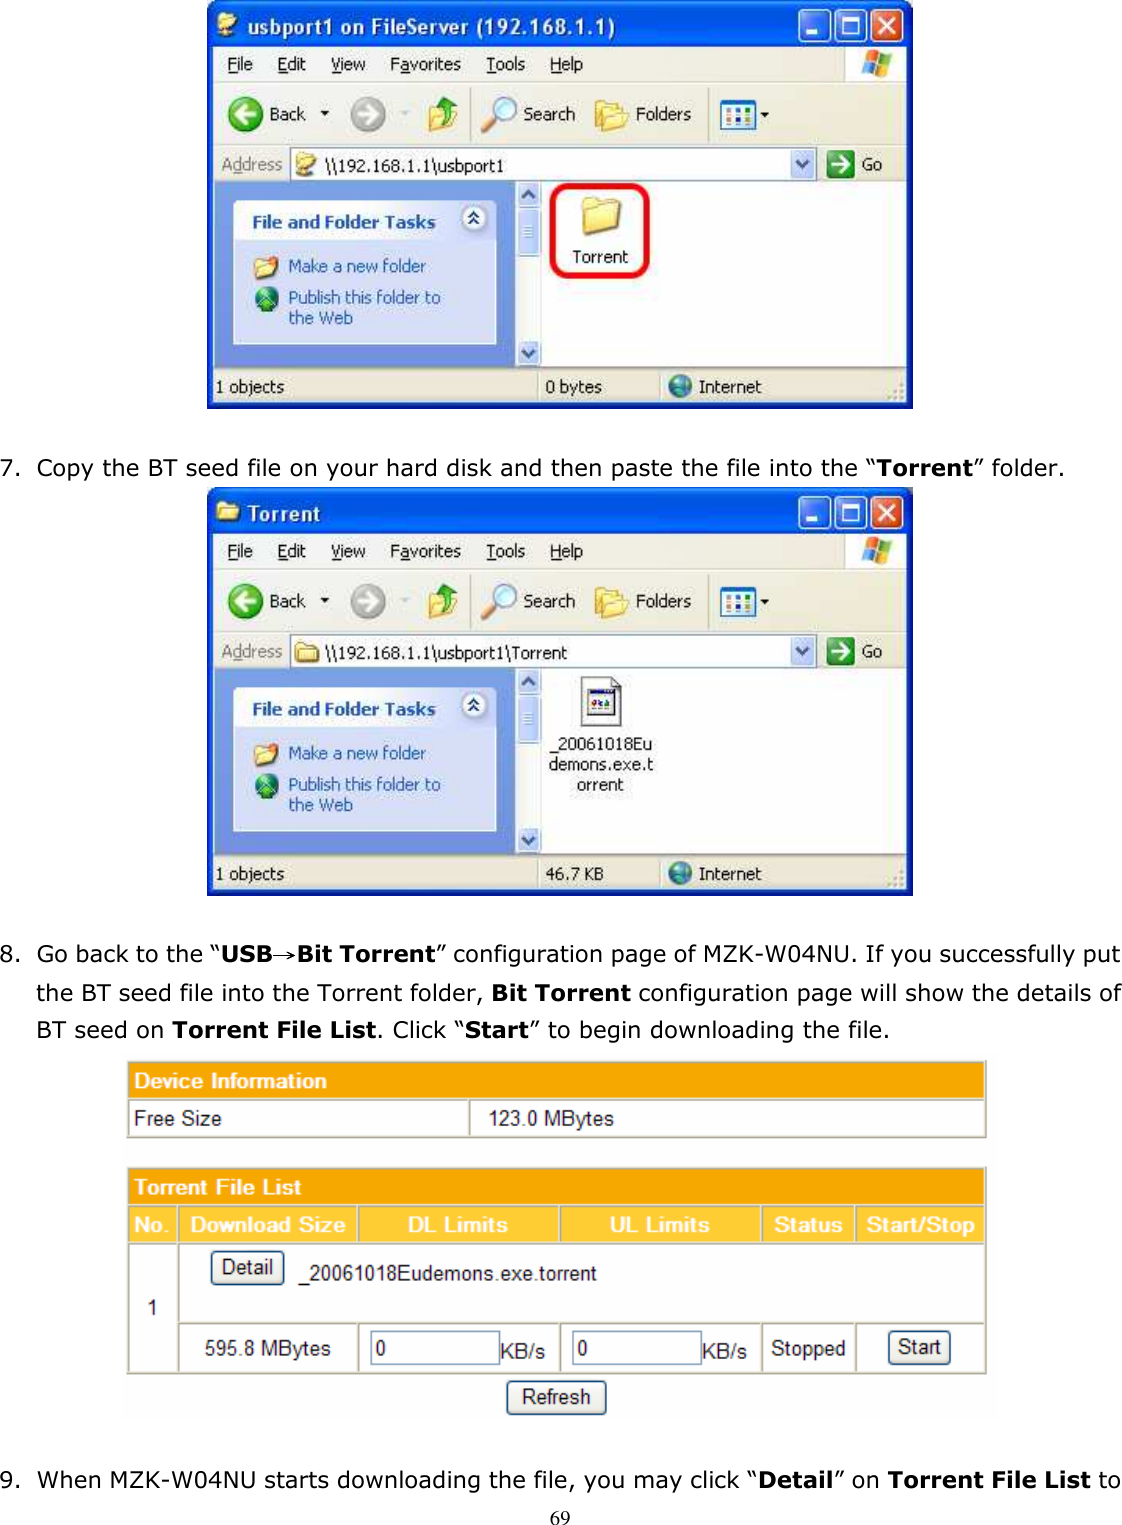   69  7. Copy the BT seed file on your hard disk and then paste the file into the “Torrent” folder.   8. Go back to the “USB→→→→Bit Torrent” configuration page of MZK-W04NU. If you successfully put the BT seed file into the Torrent folder, Bit Torrent configuration page will show the details of BT seed on Torrent File List. Click “Start” to begin downloading the file.     9. When MZK-W04NU starts downloading the file, you may click “Detail” on Torrent File List to 